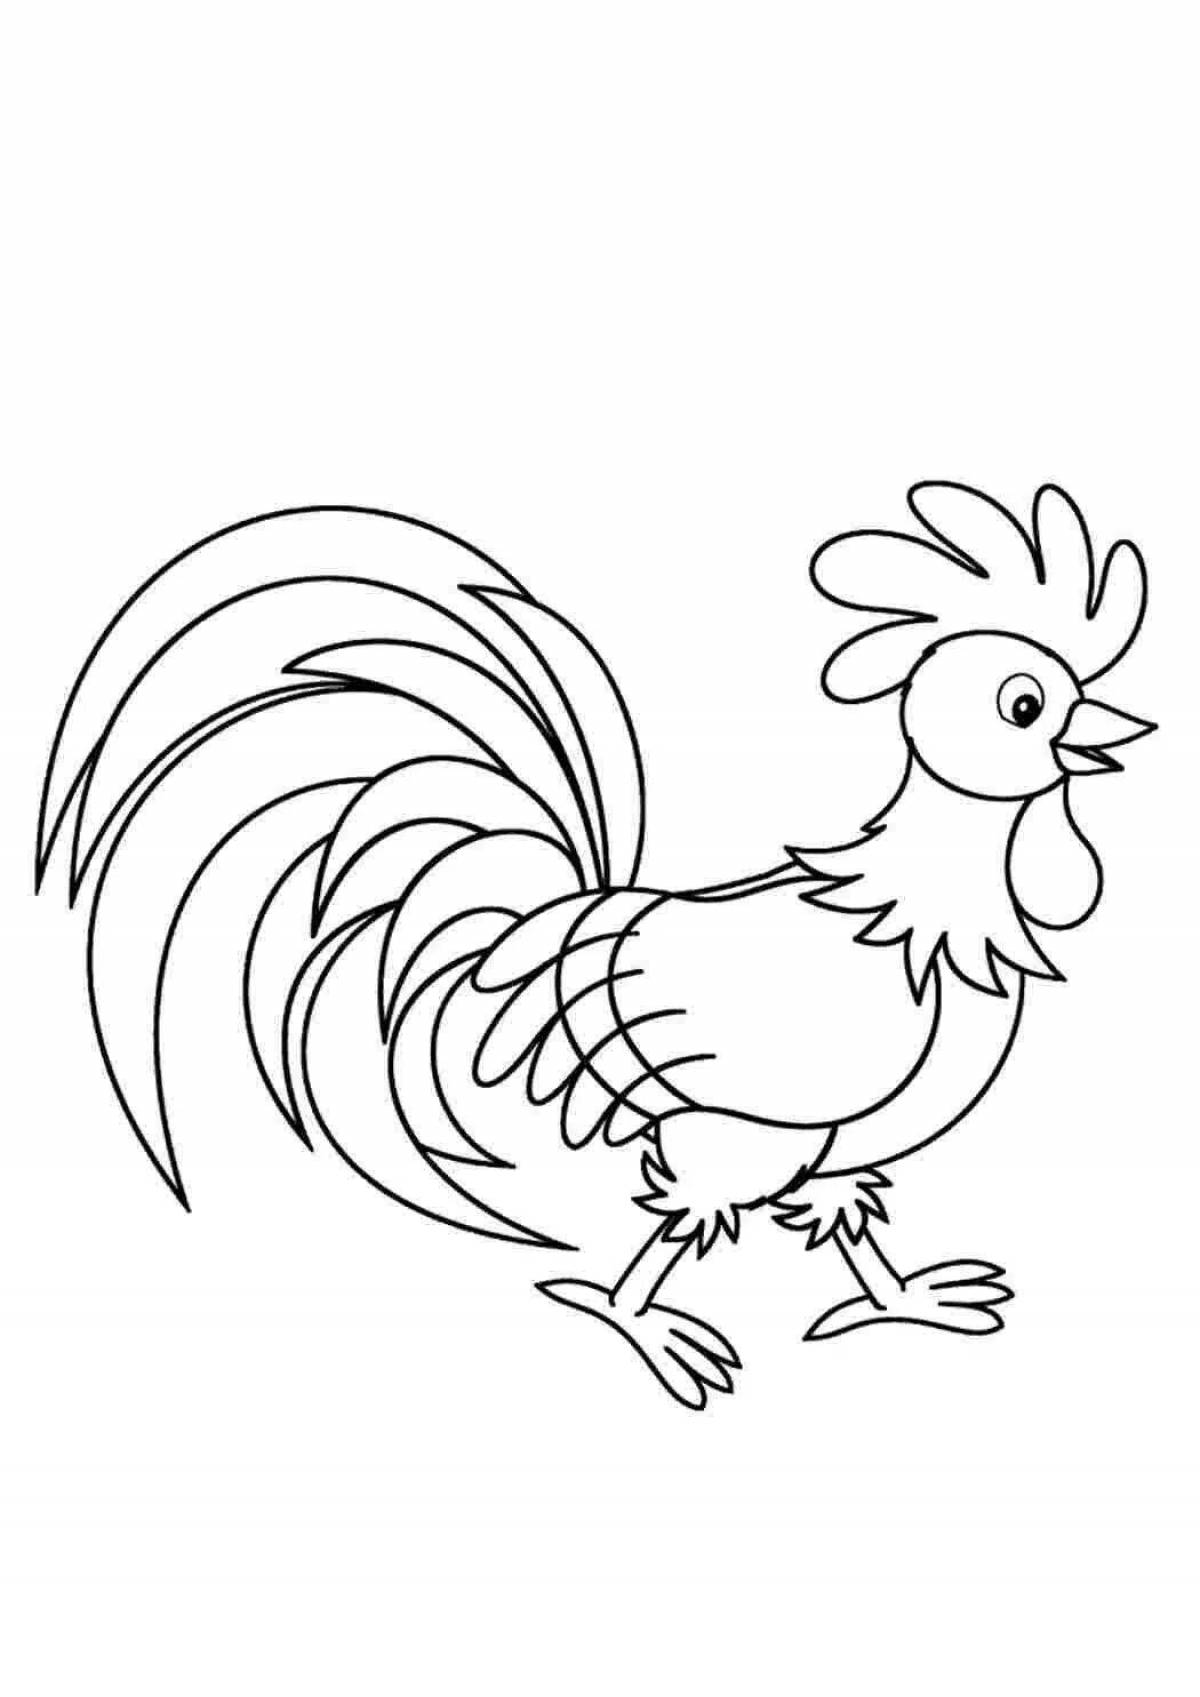 Adorable cockerel drawing for kids